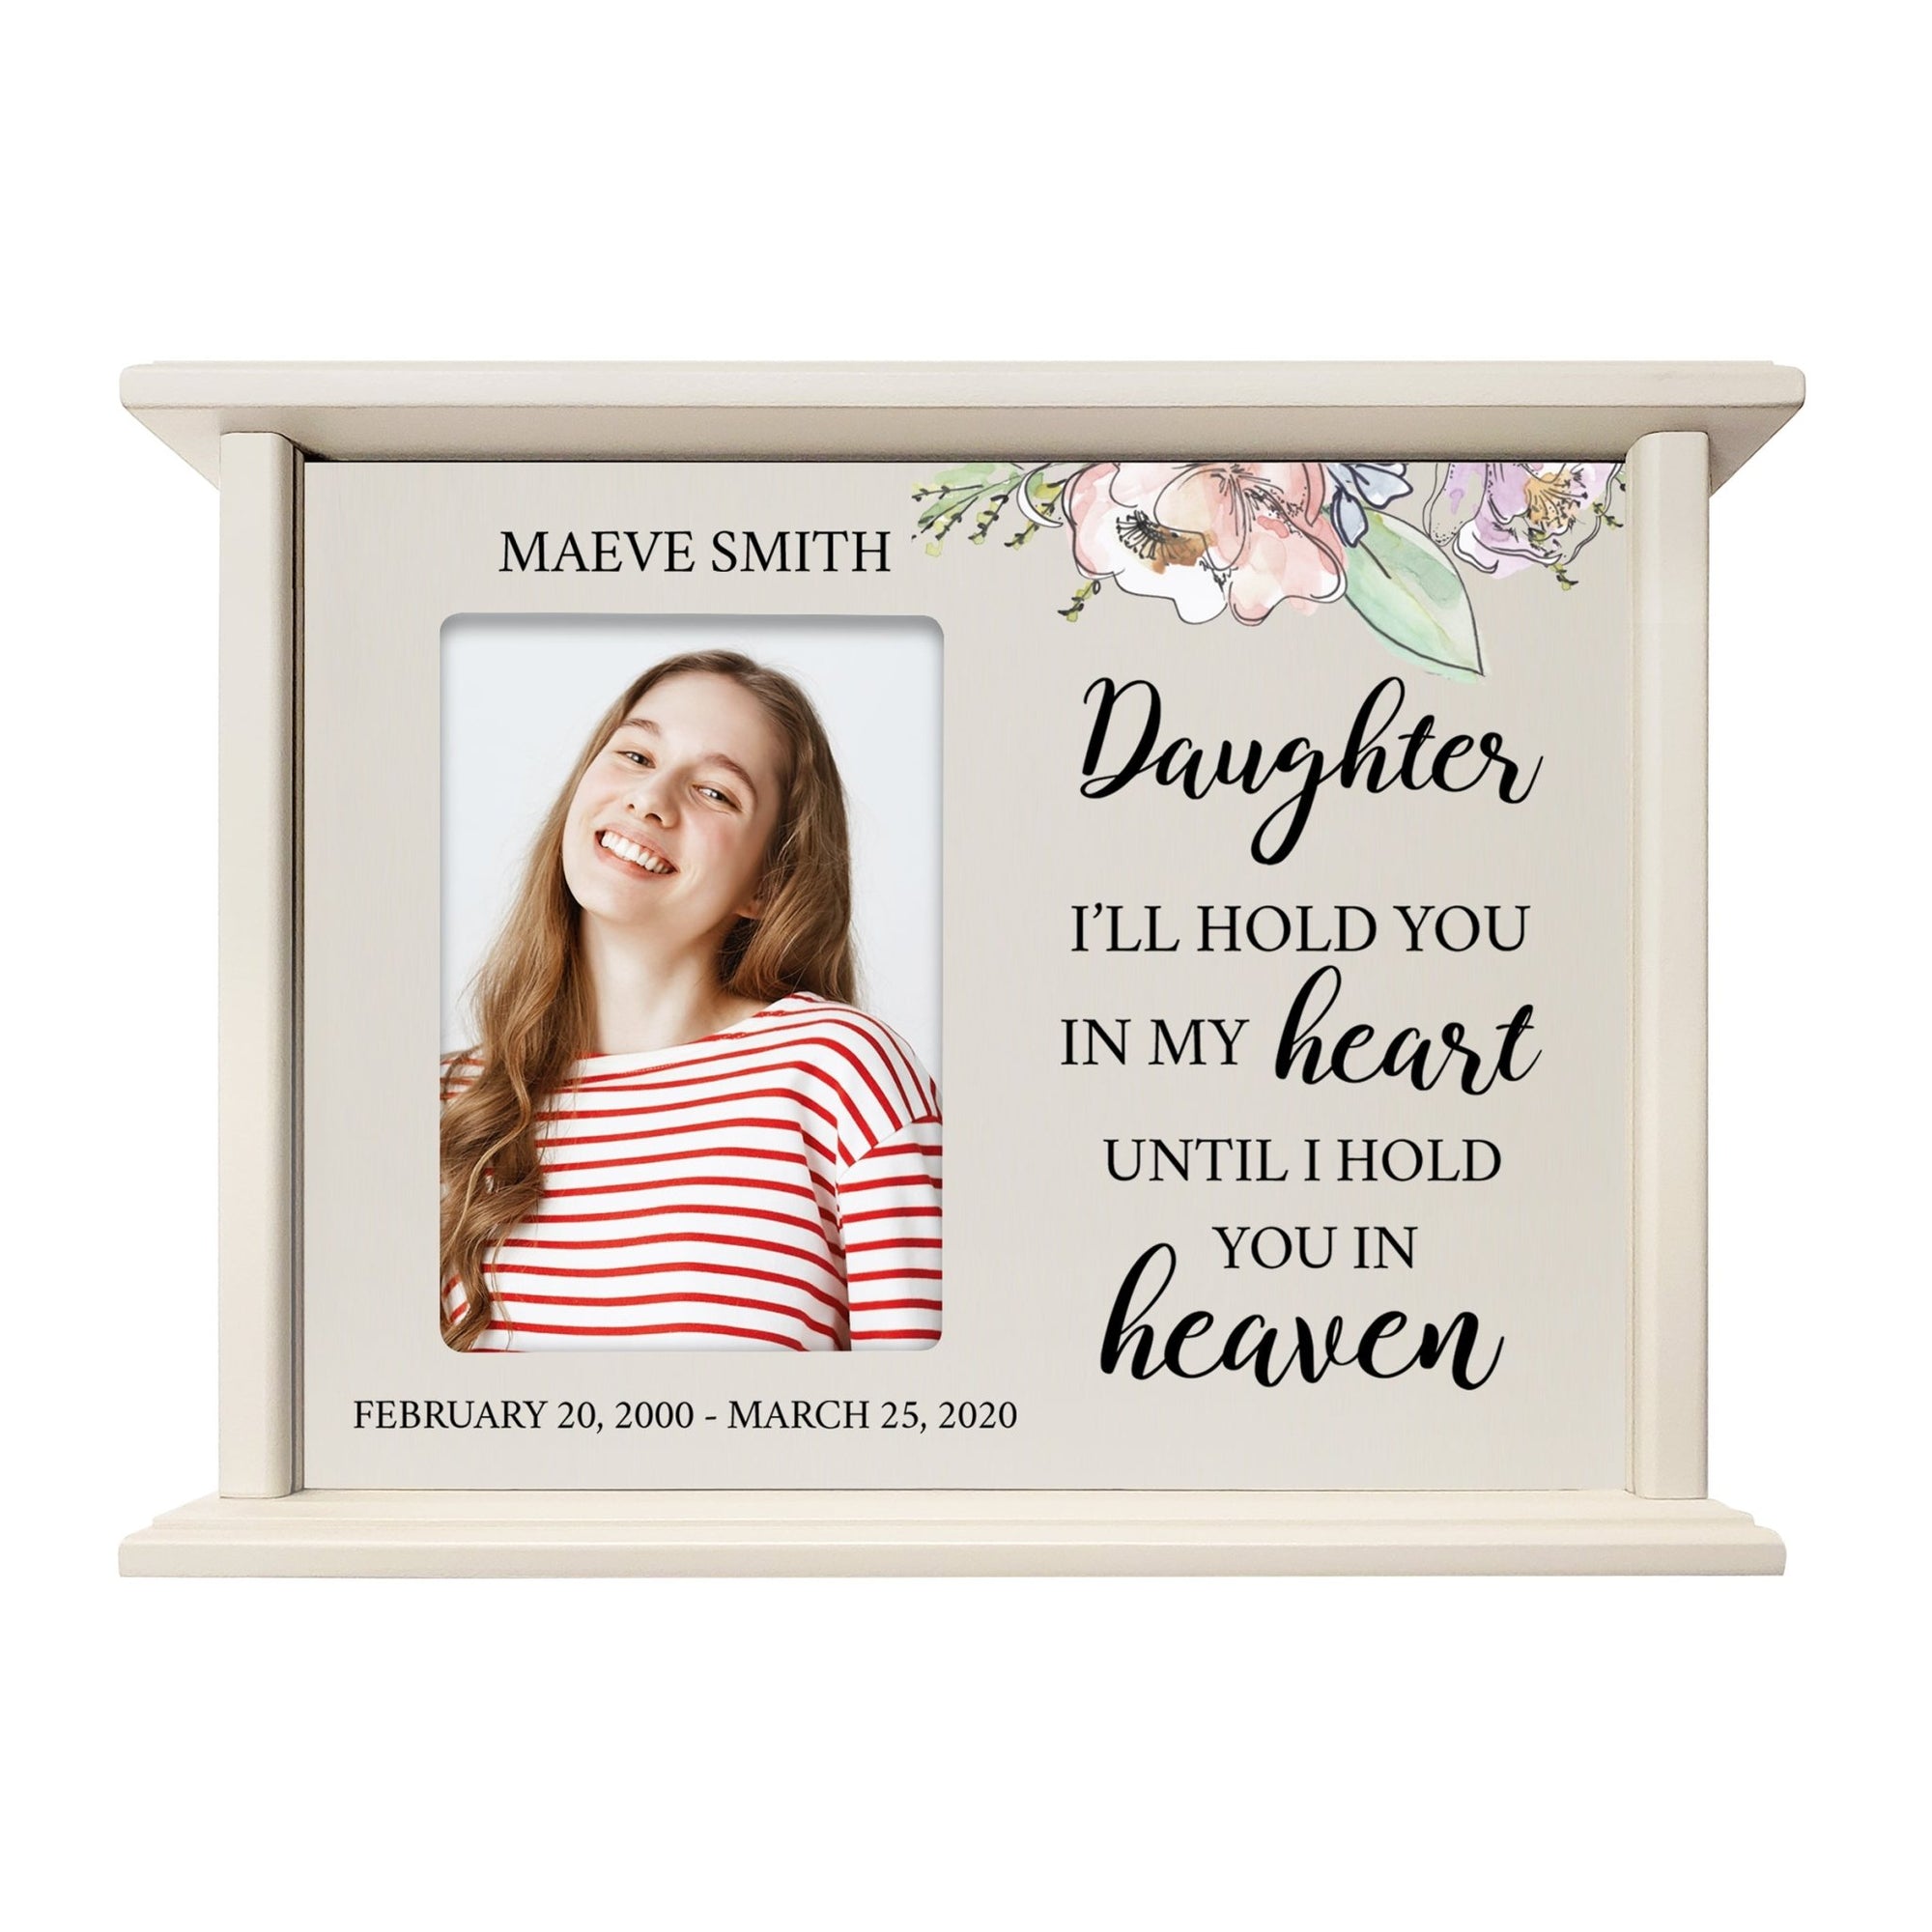 Personalized Memorial Cherry Wood 12 x 4.5 x 9 Cremation Urn Box with Picture Frame holds 200 cu in of Human Ashes and 4x6 Photo - I’ll Hold In My Arms (Ivory) - LifeSong Milestones